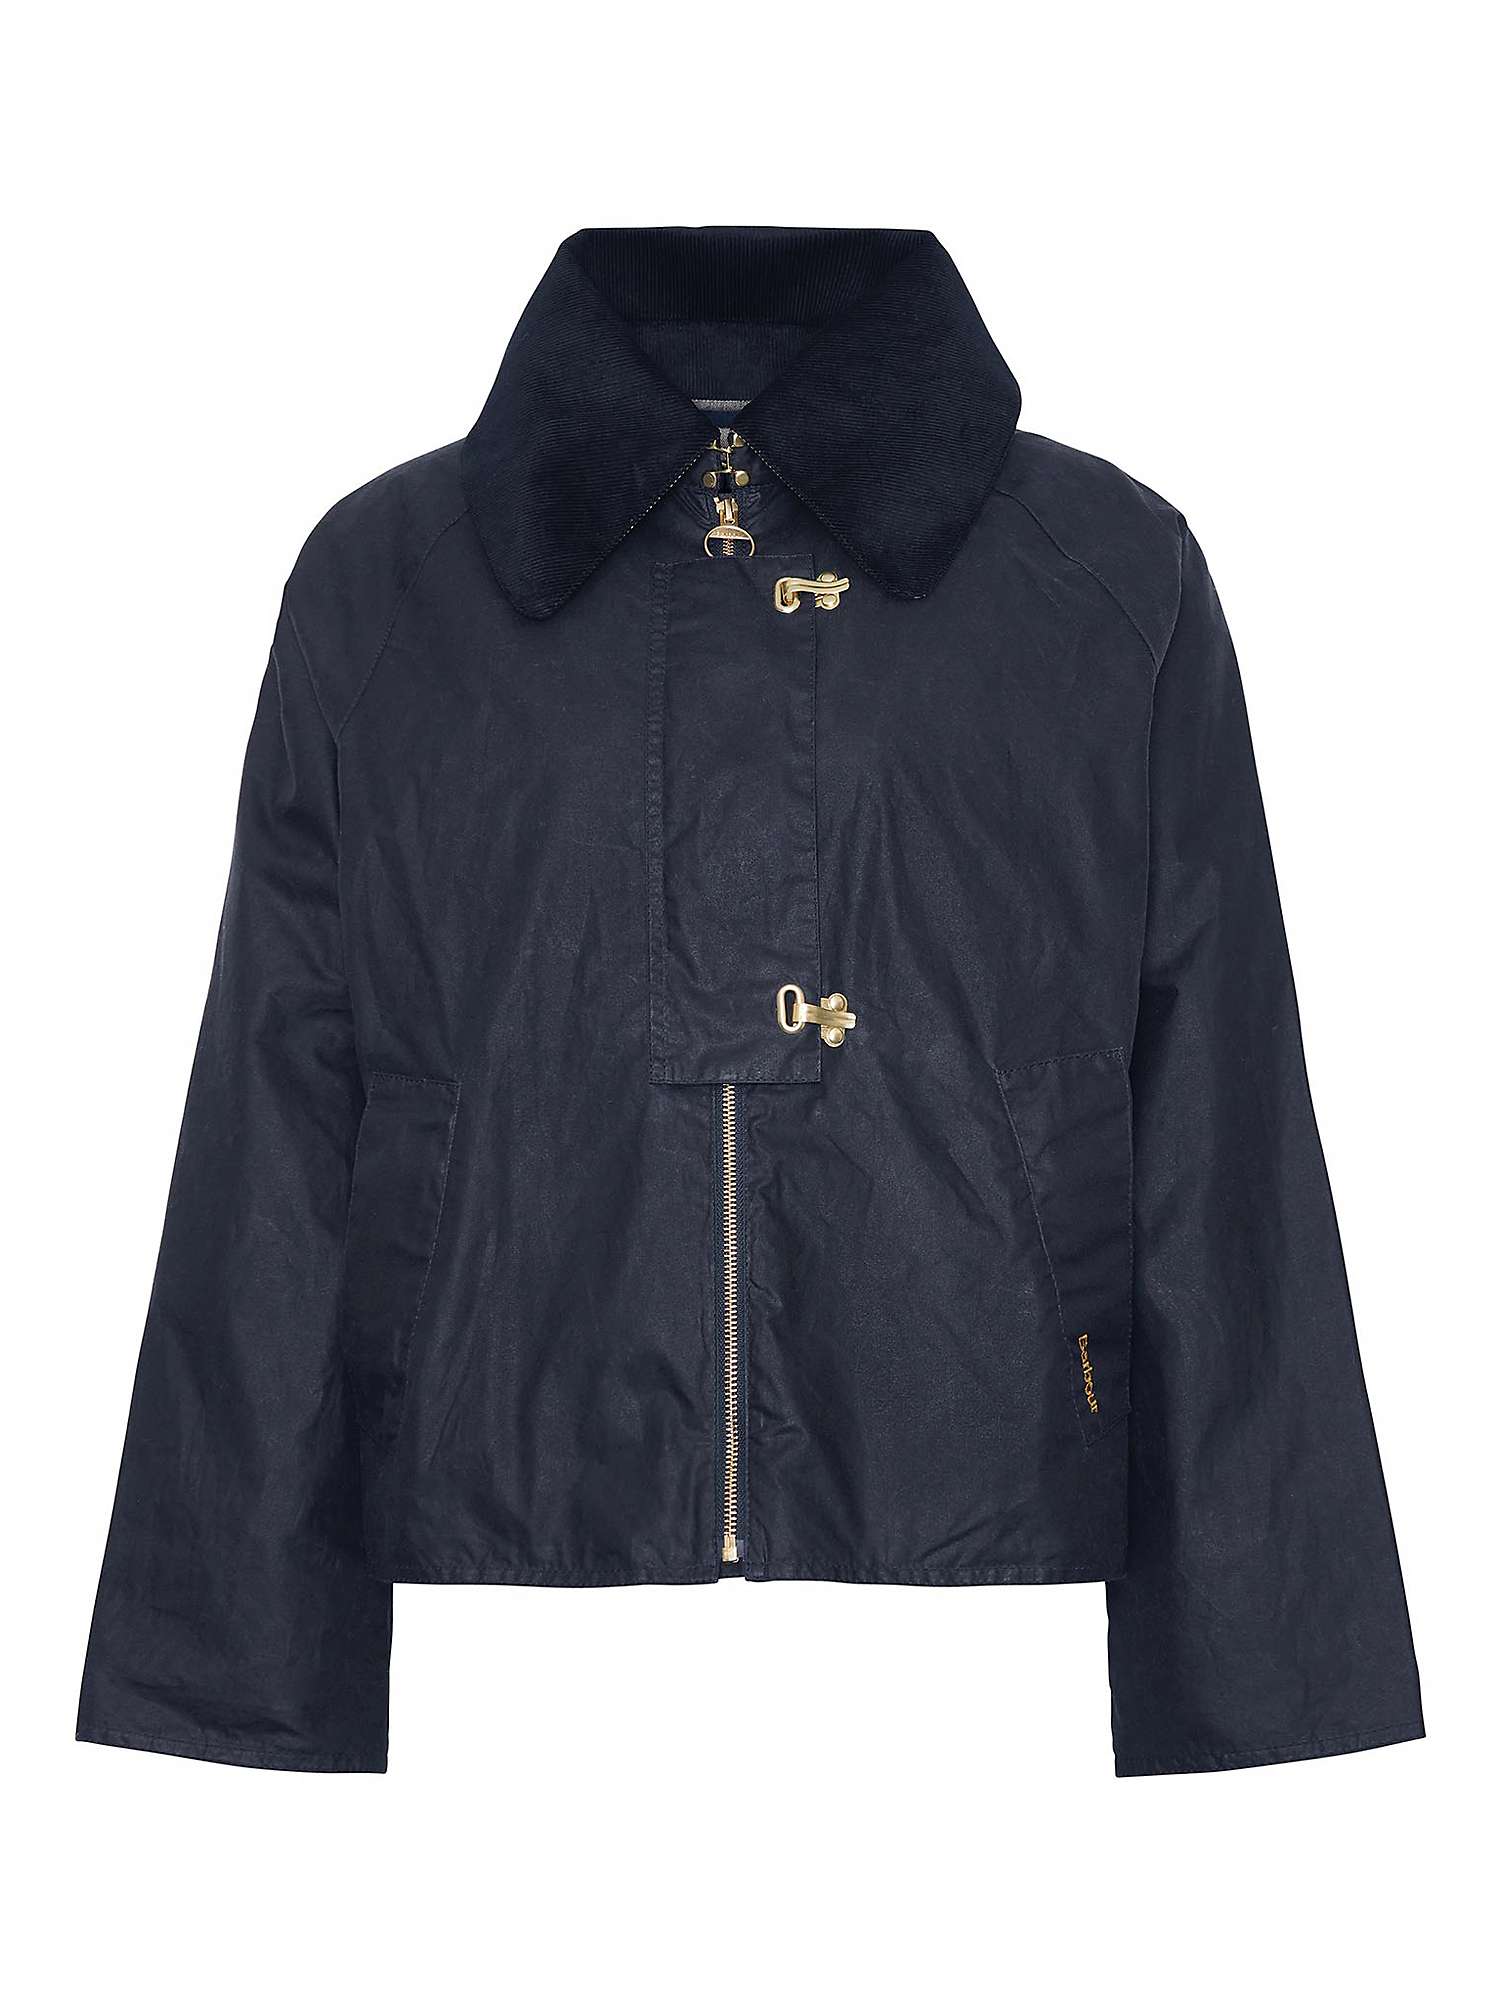 Barbour Drummond Waxed Jacket, Royal Navy at John Lewis & Partners